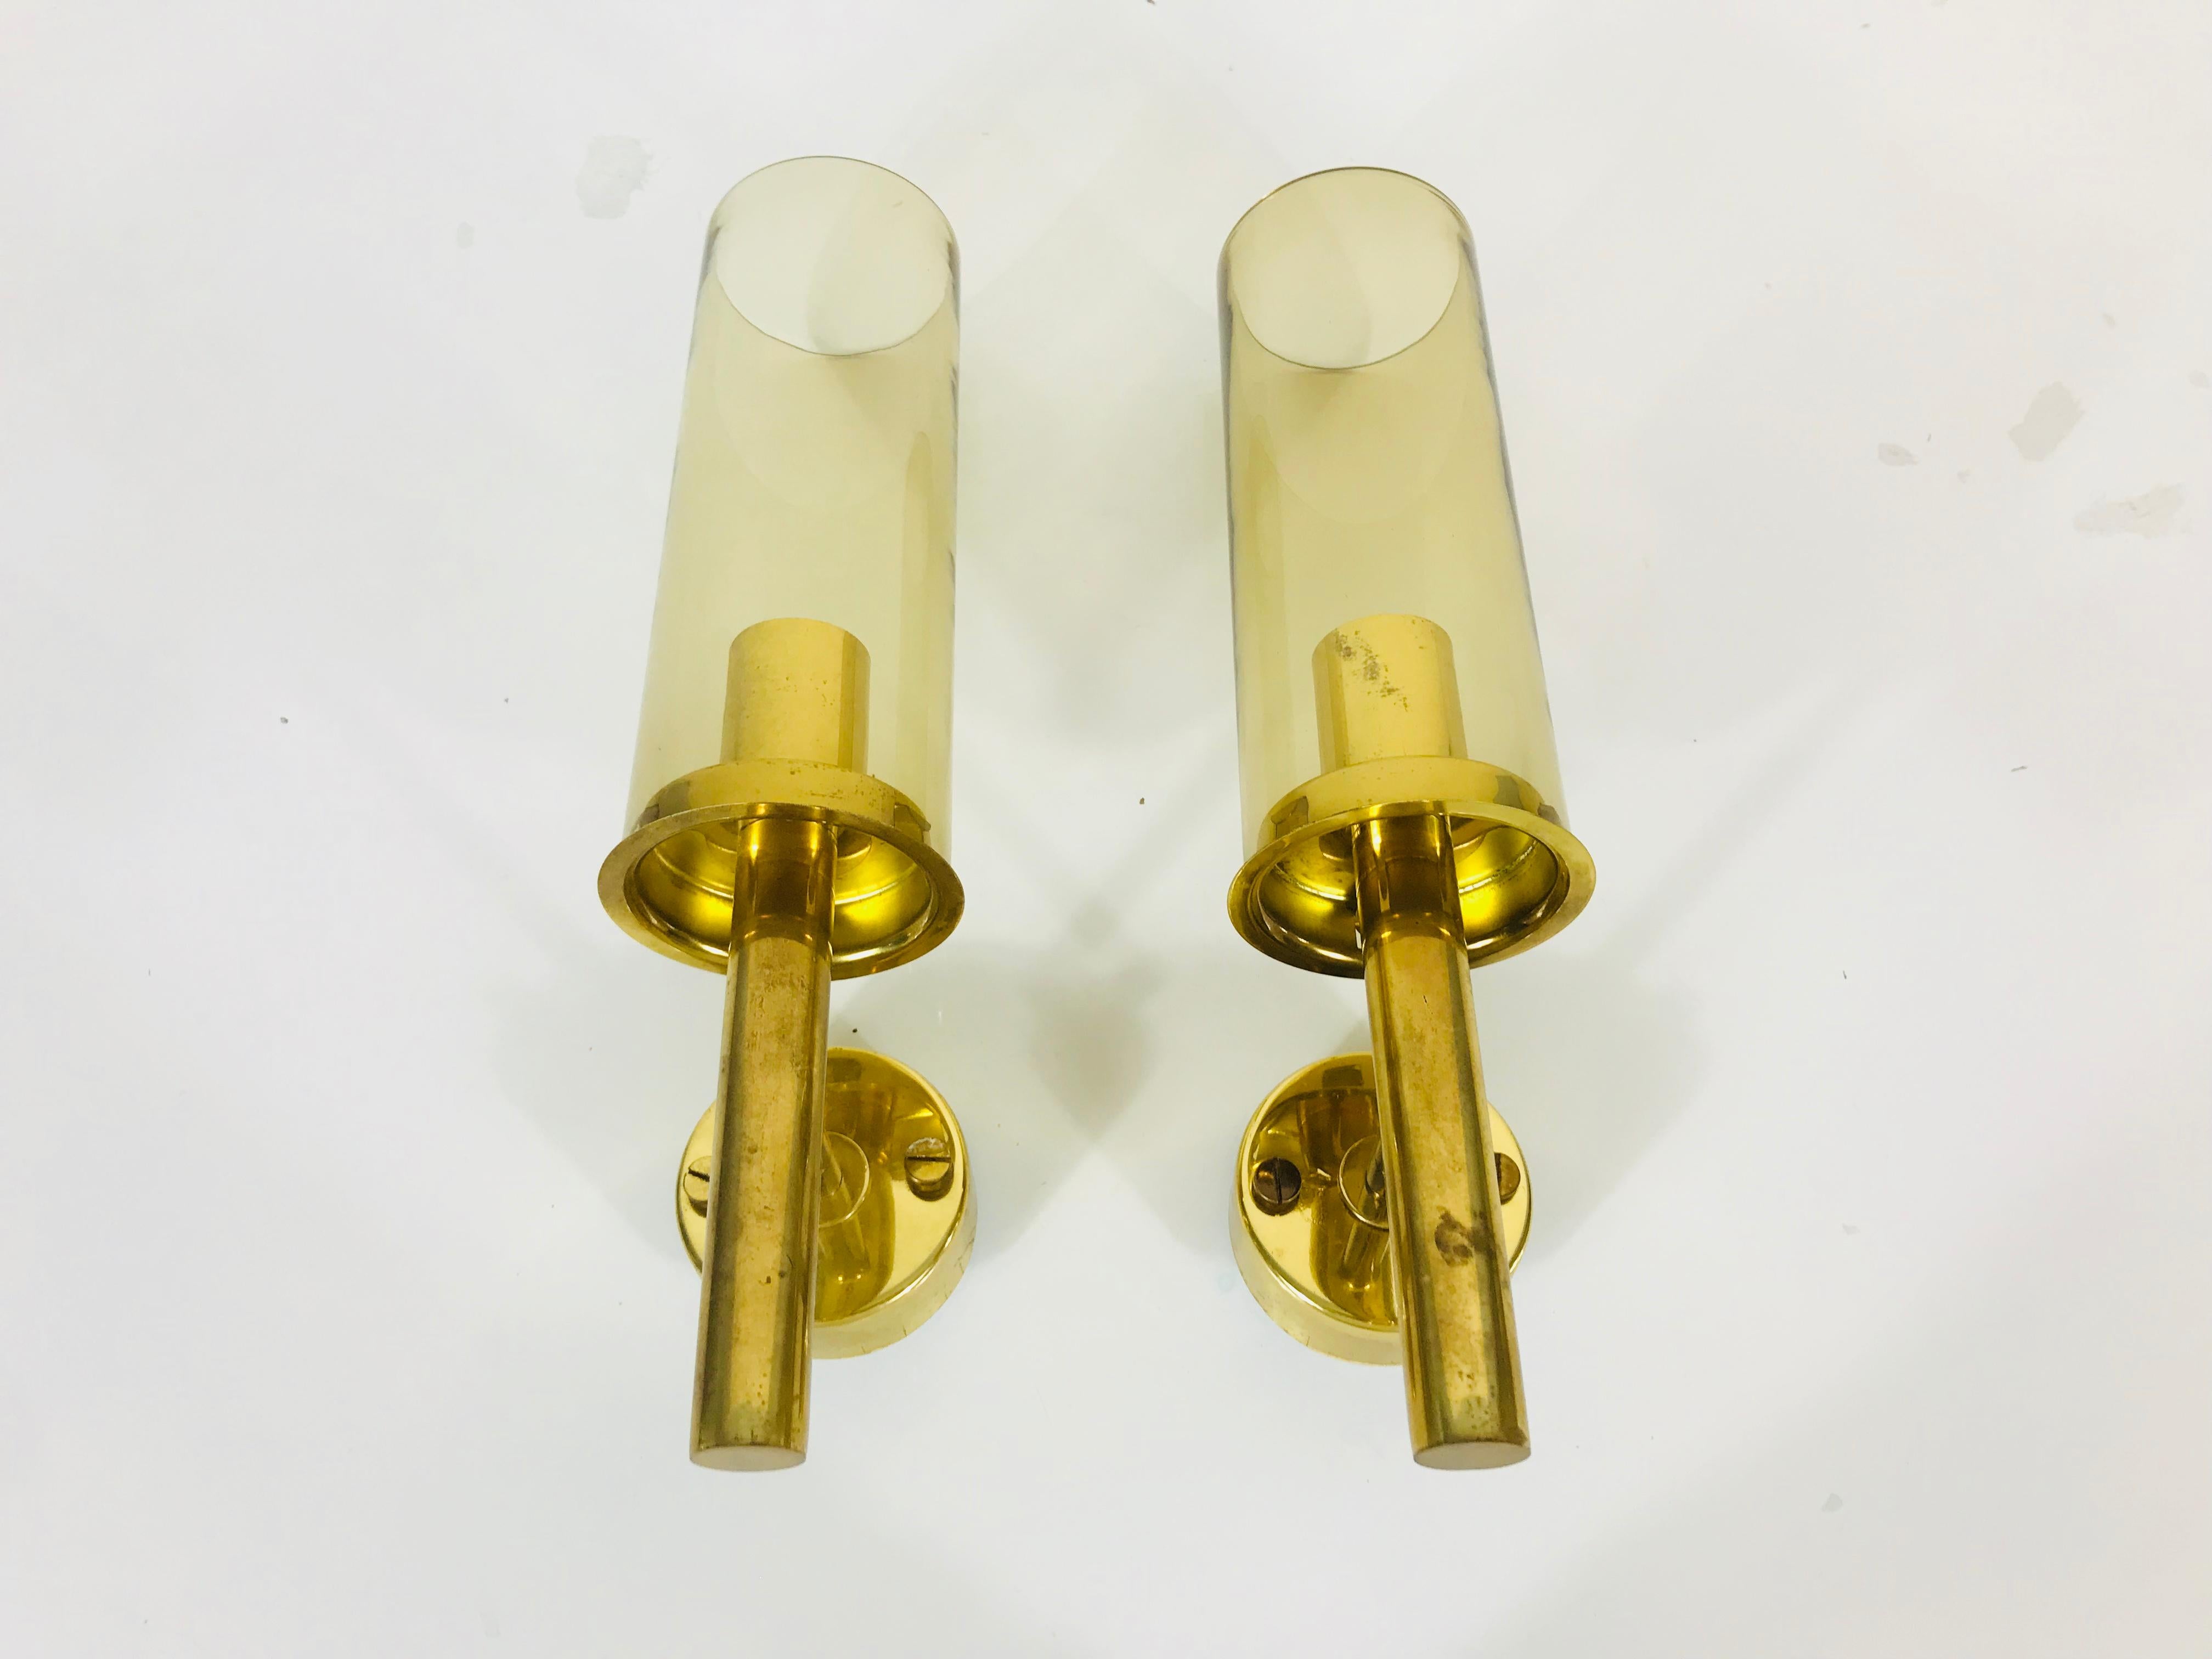 Smoked Glass Pair of Mid-Century Modern Brass Sconces by Hans-Agne Jakobsson, Sweden, 1960s